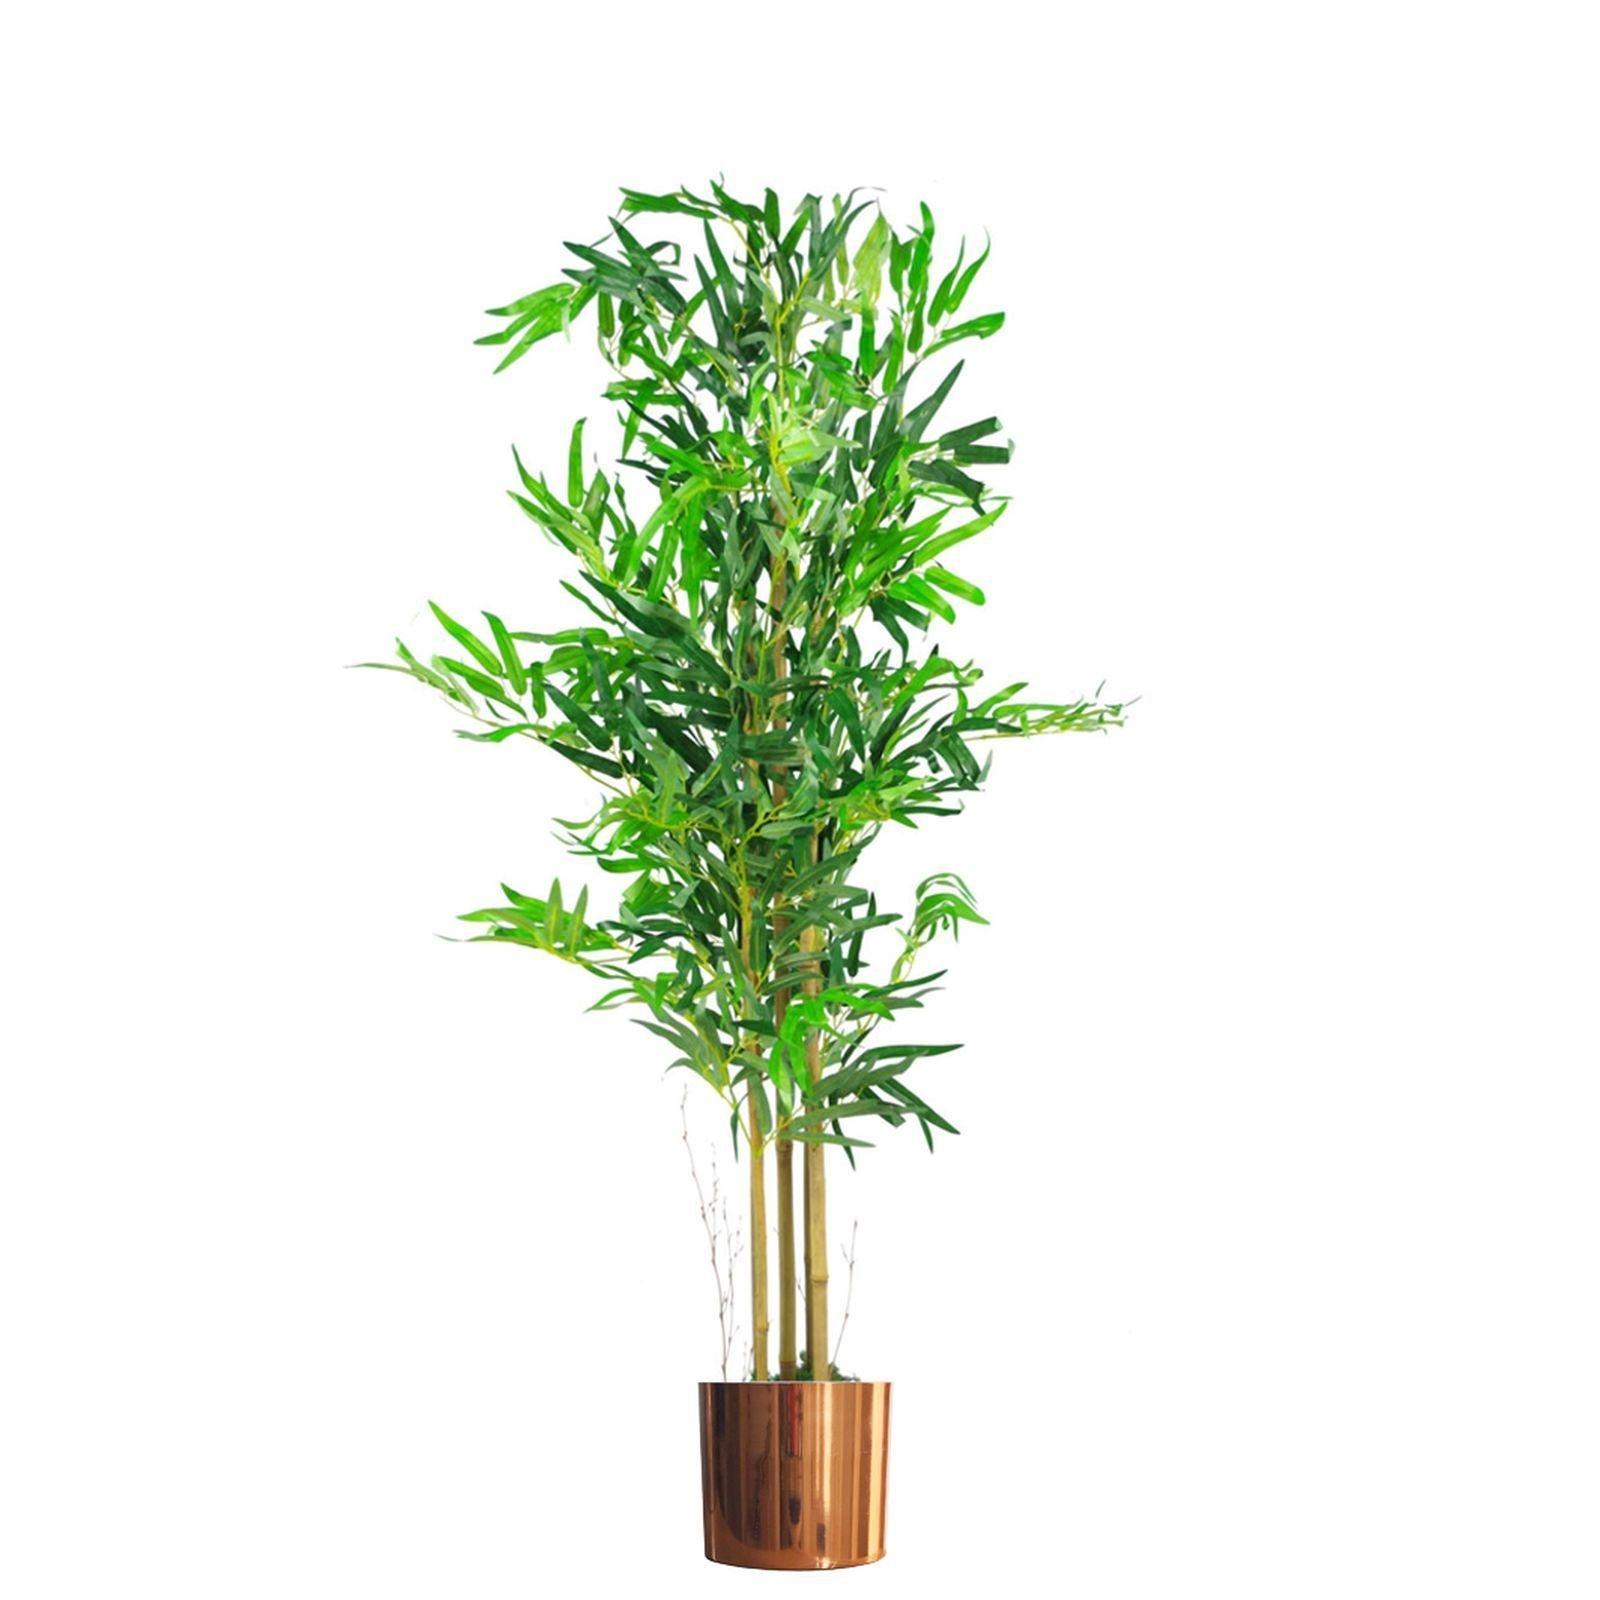 120cm (4ft) Natural Look Artificial Bamboo Plants Trees with Copper Metal Planter